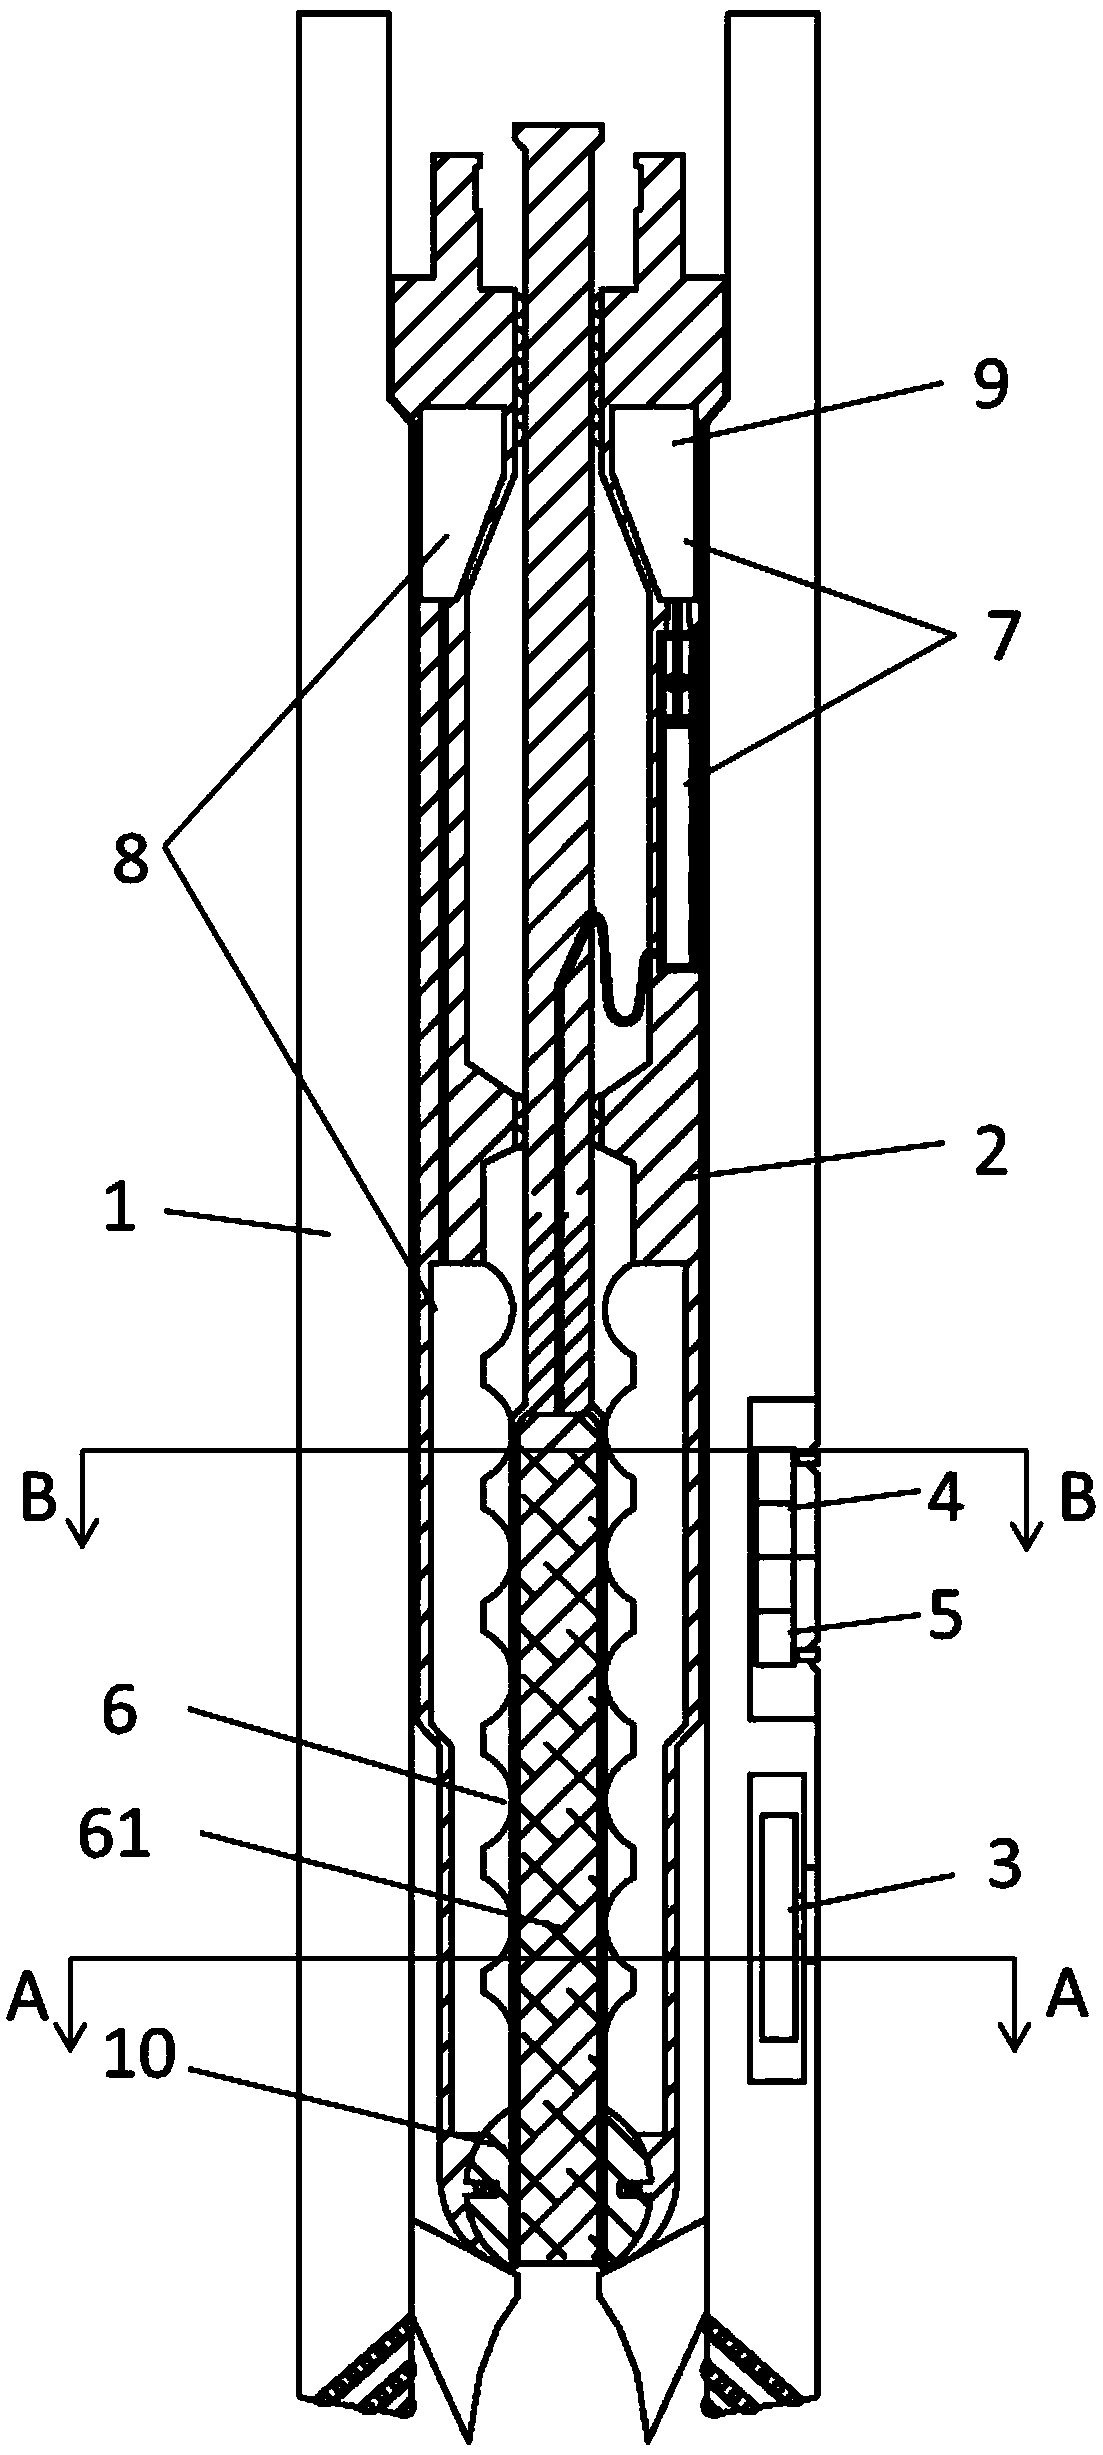 In-situ fidelity coring system and coring method